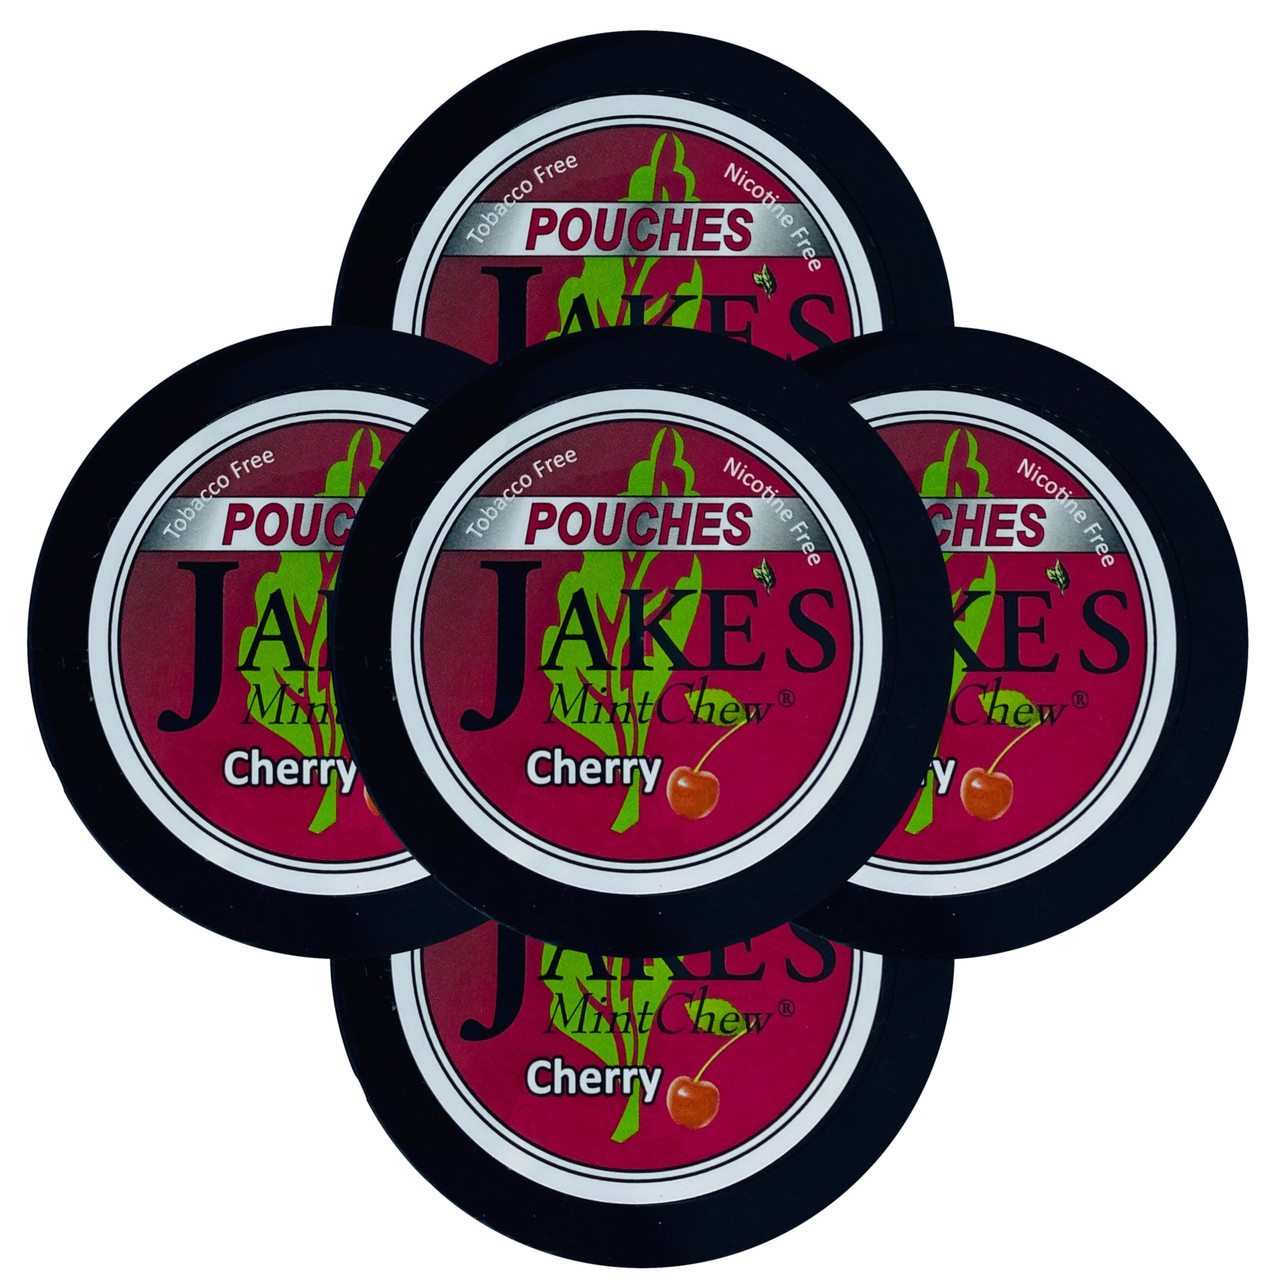 Jake's Mint Chew Pouches Cherry 5 Cans